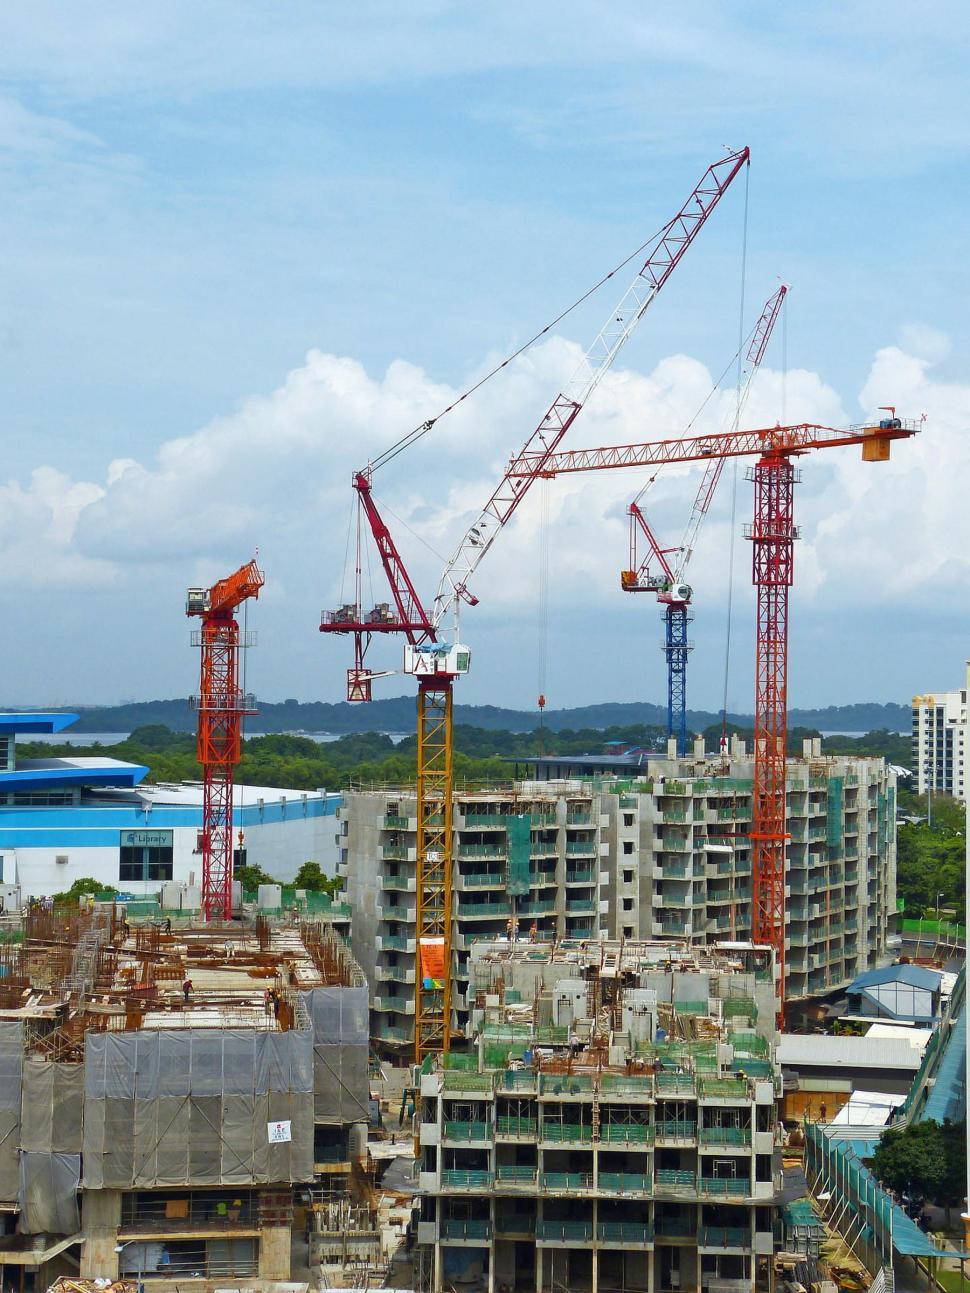 Free Image of Group of Cranes Standing in the Air 